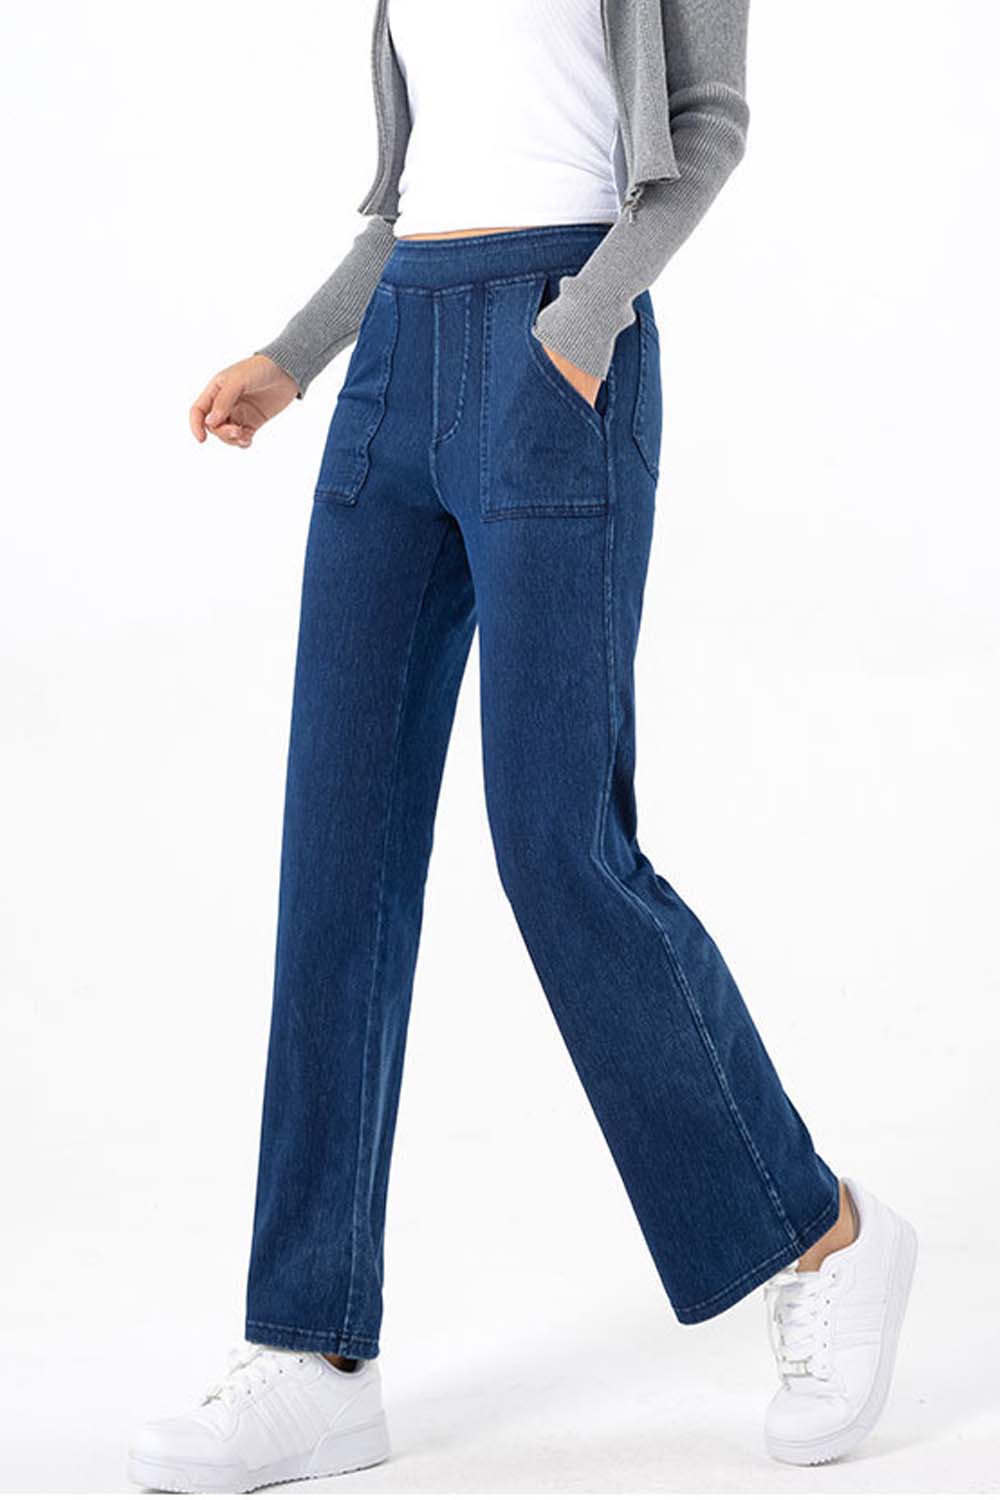 Pocketed Long Jeans Print on any thing USA/STOD clothes